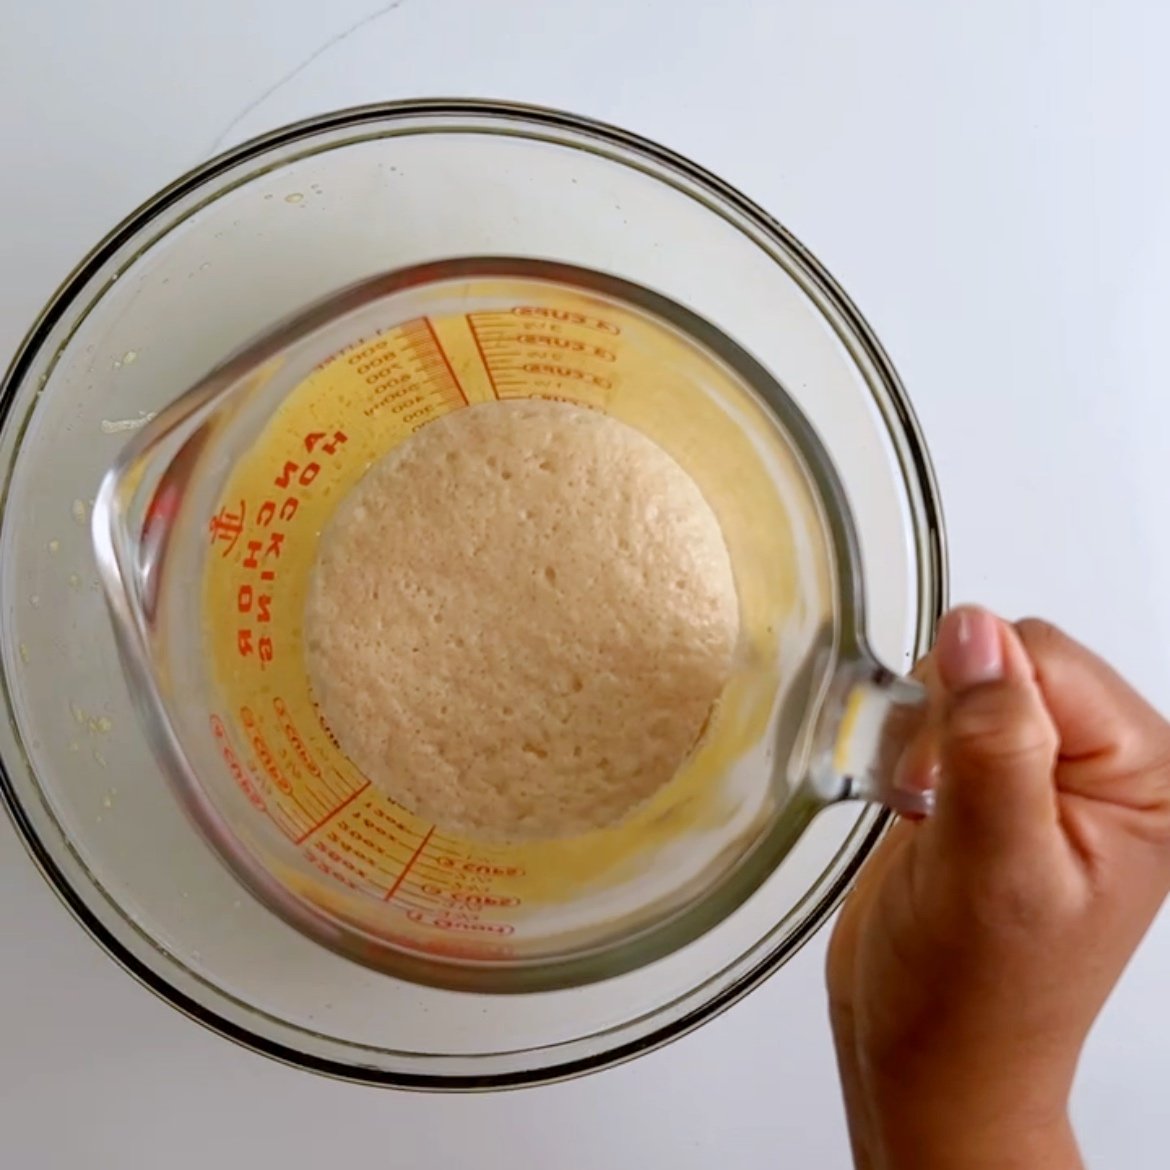 bloomed yeast in a glass measuring cup over a glass bowl